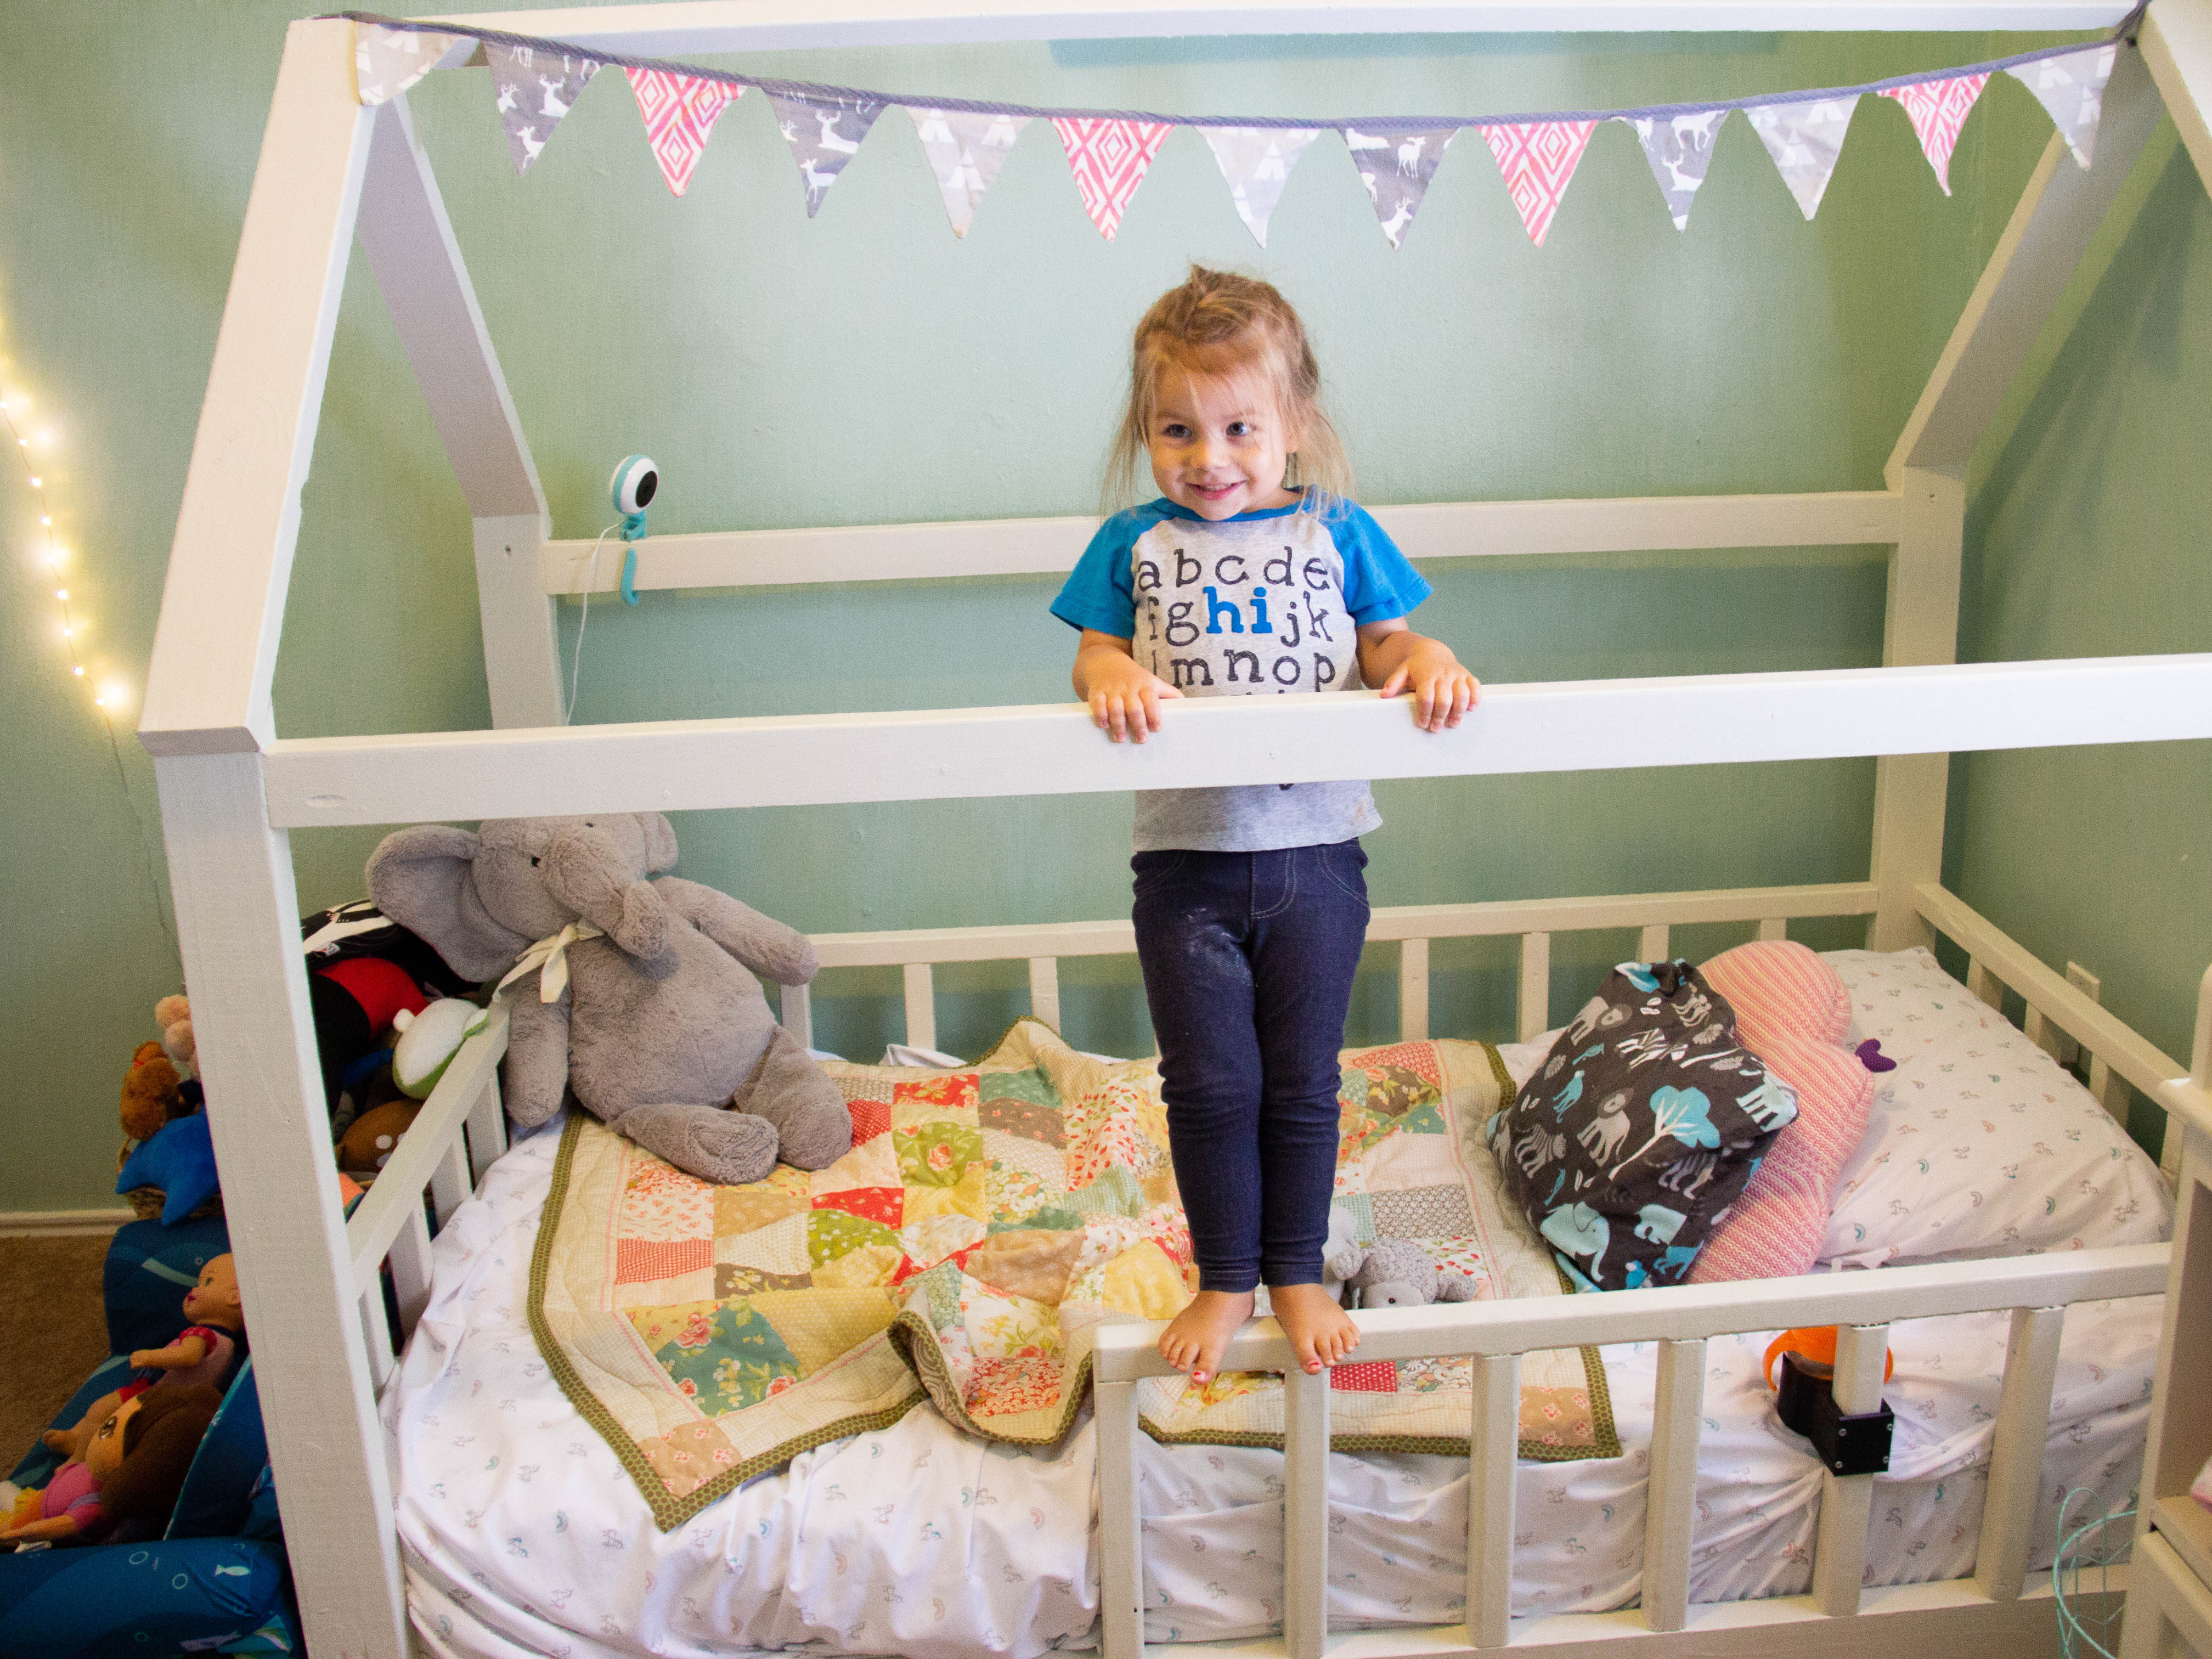 Baby and Toddler Shared Bedroom Reveal: DIY Room Remodel